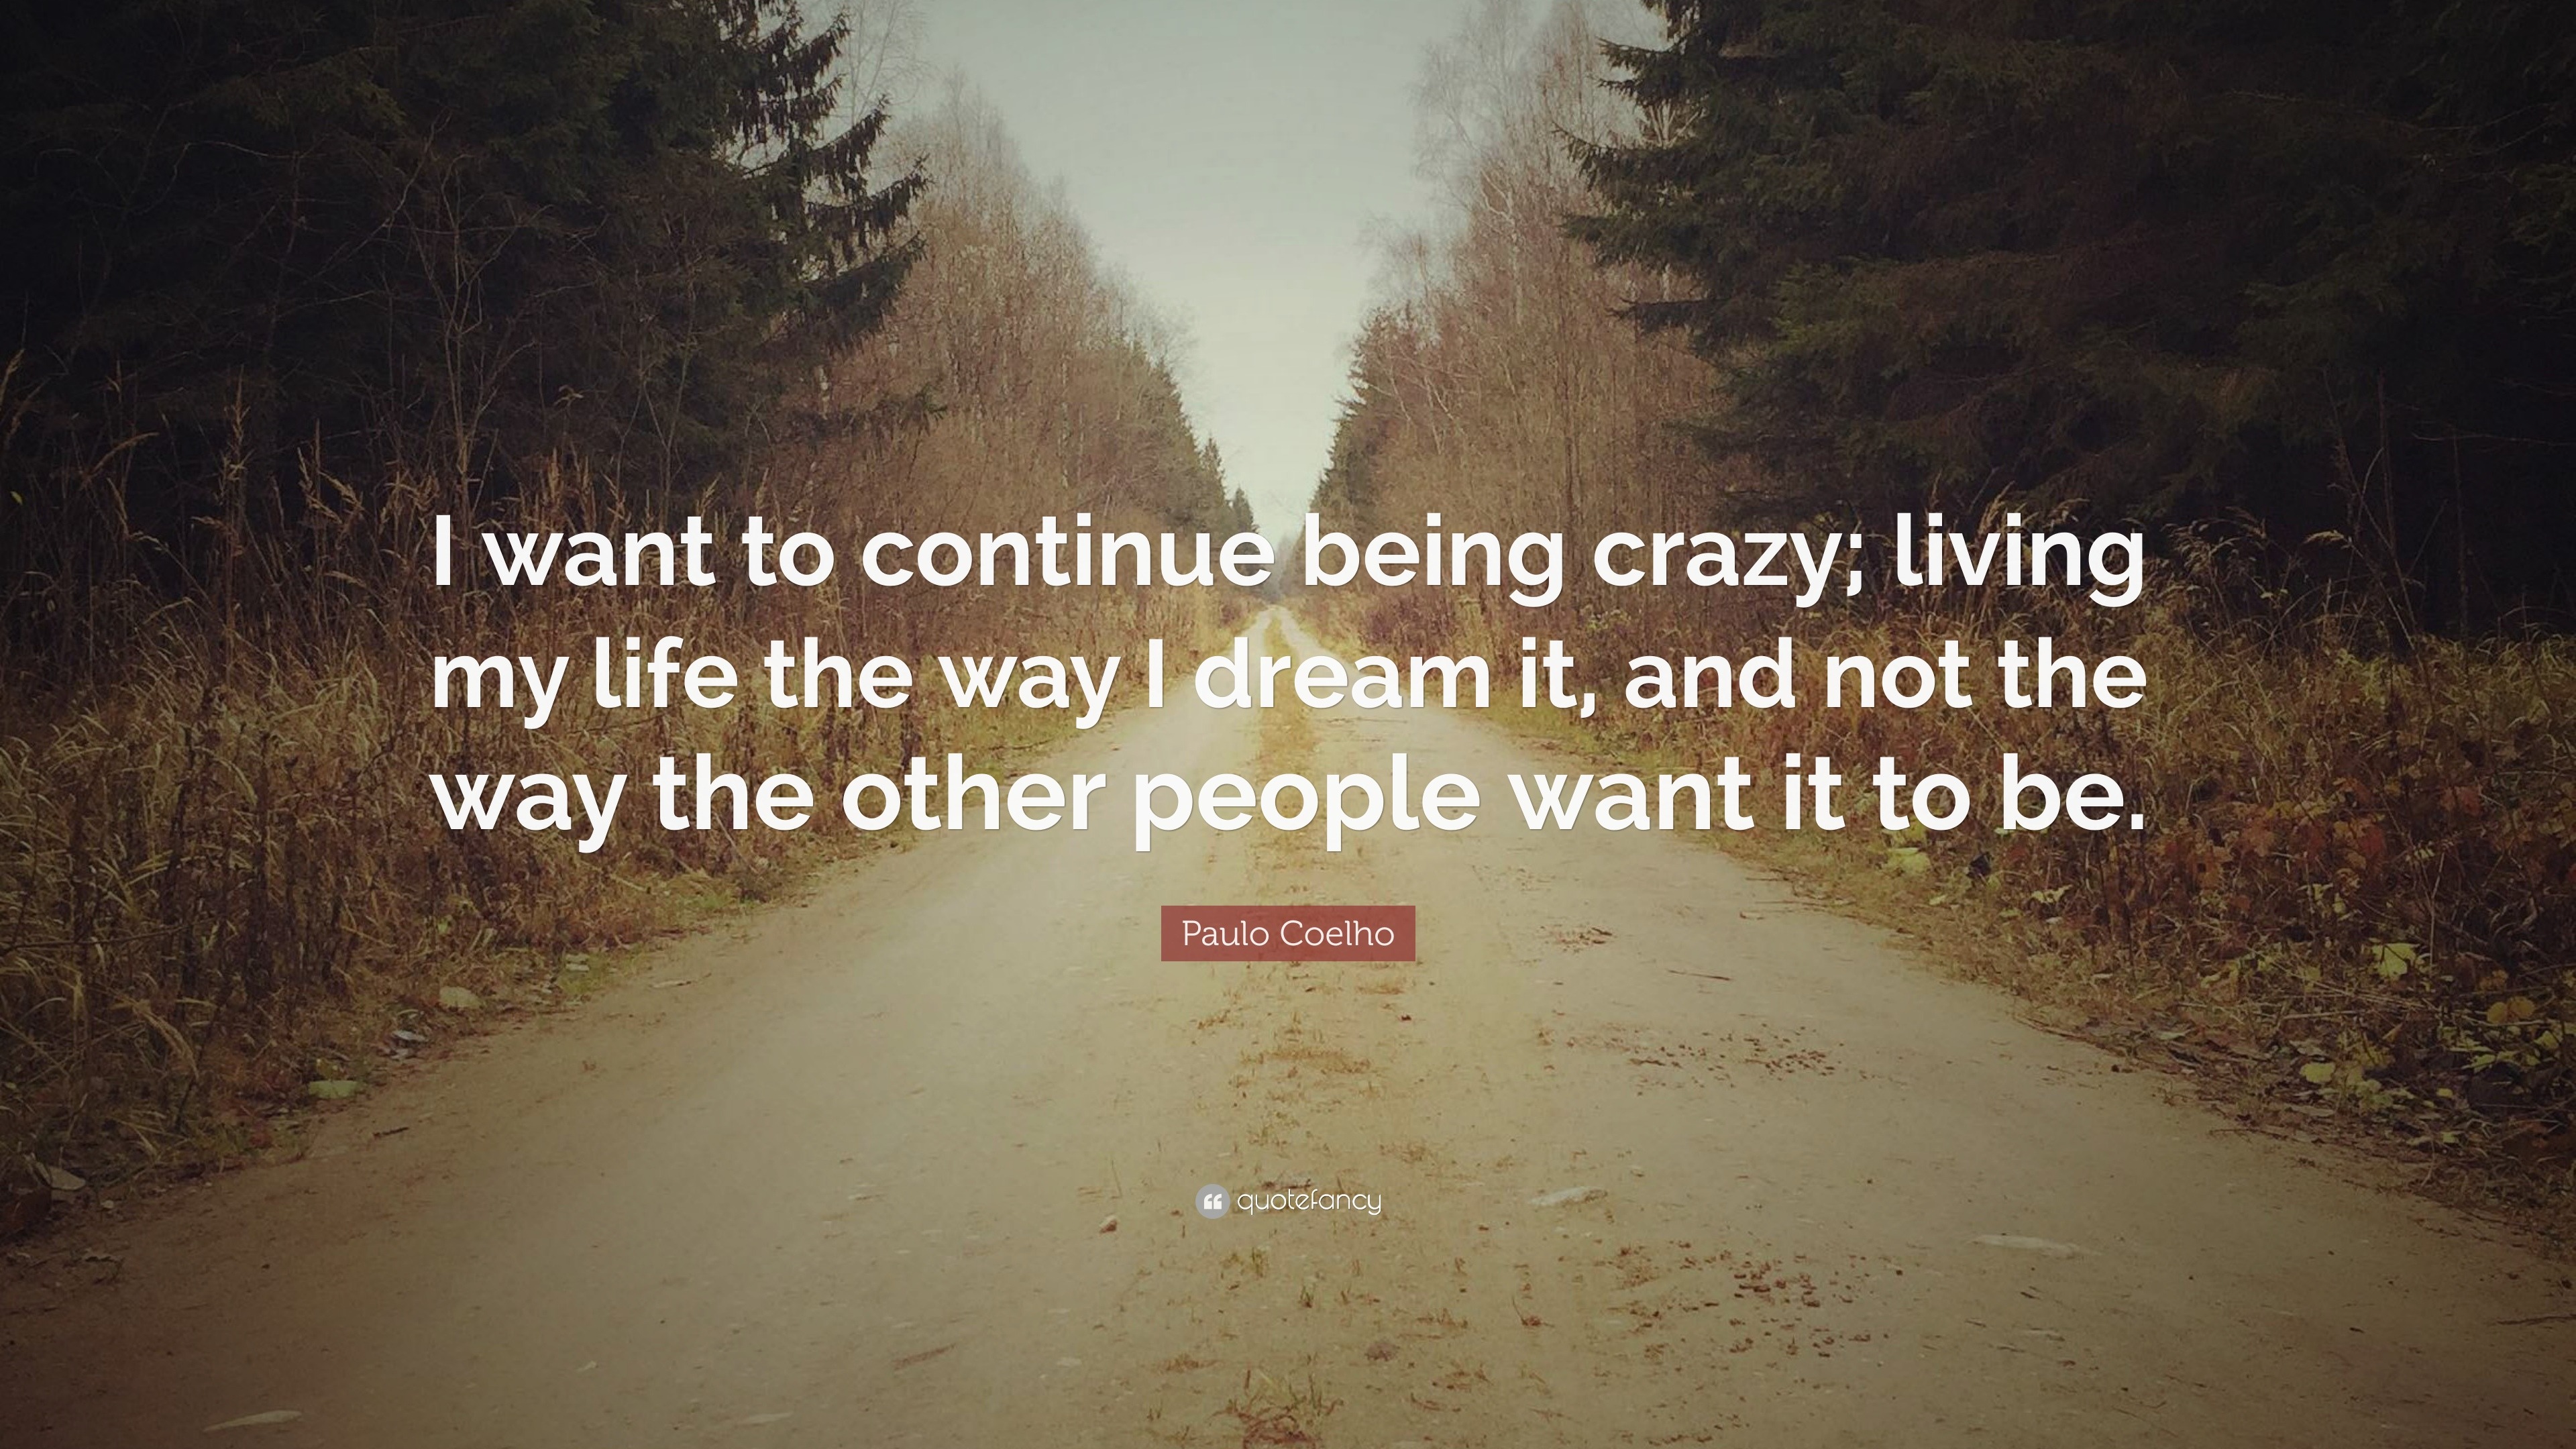 Paulo Coelho Quote: “I want to continue being crazy; living my life the ...